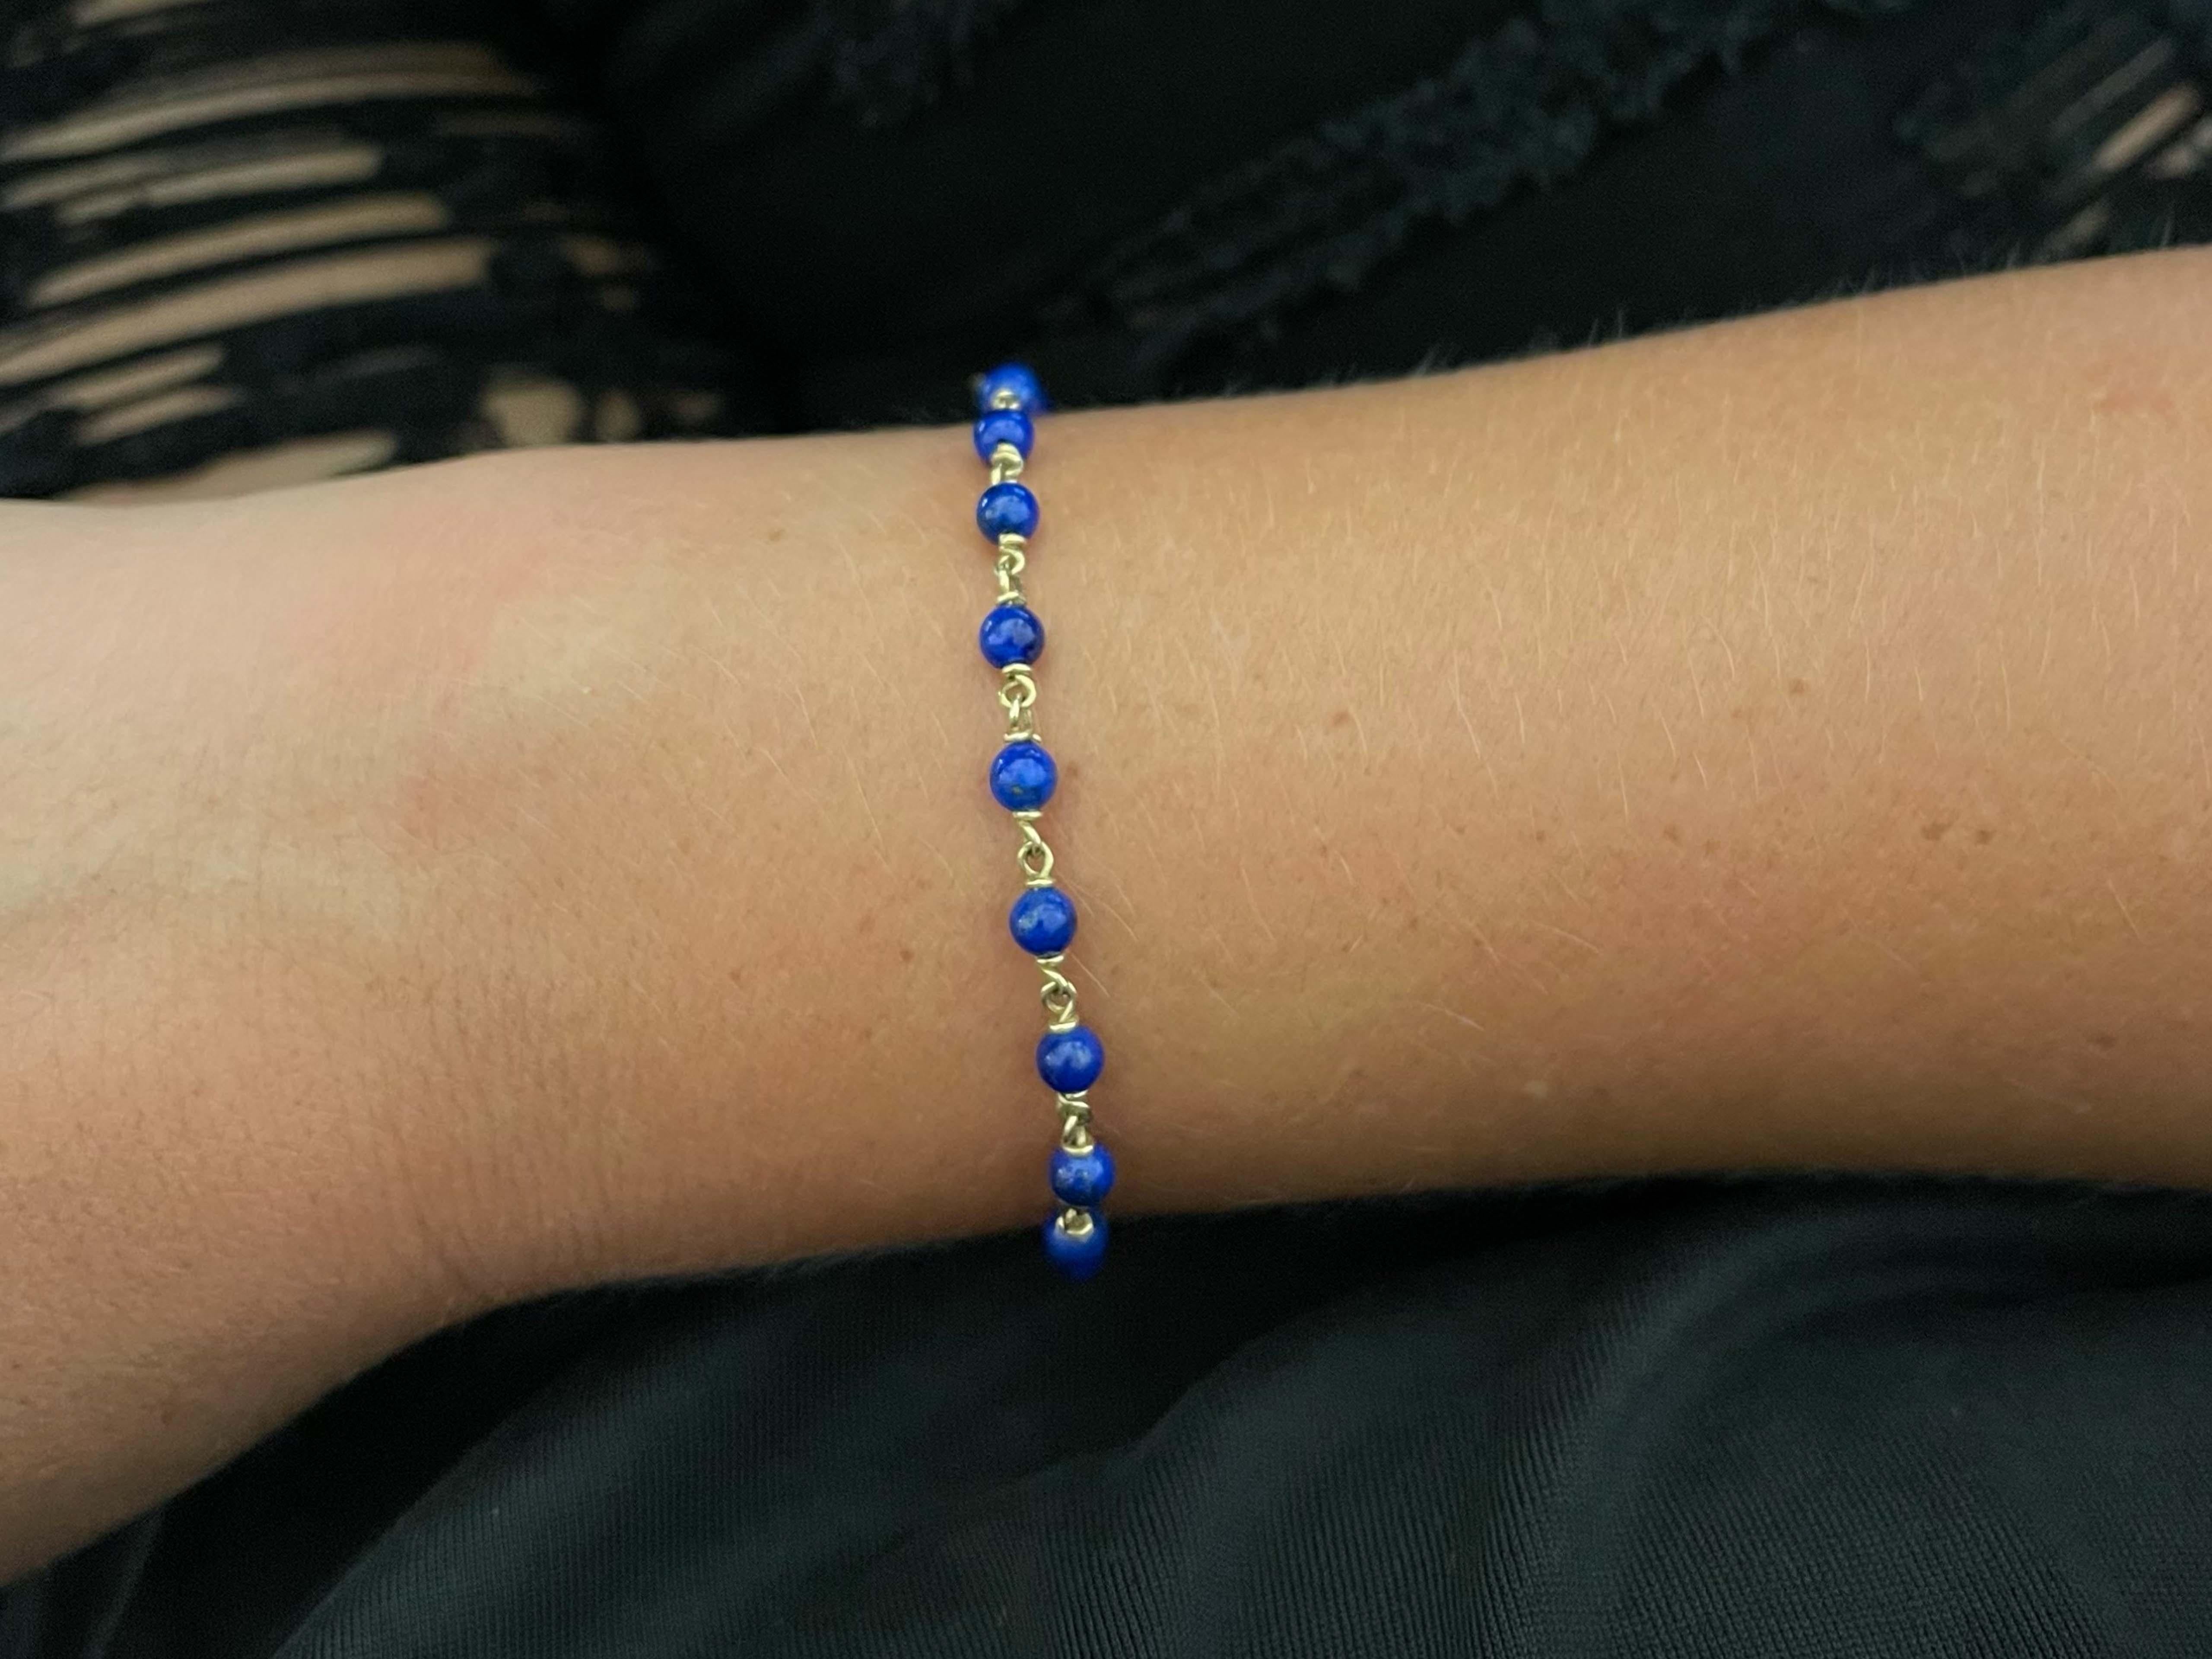 Bracelet Specification:

Total Weight: 4.8 Grams

Lapis Lazuli Diameter: 4.3 mm

Bracelet Length: 7 inches

Lapis Lazuli Count: 20 

Condition: Preowned, excellent

Stamped: 